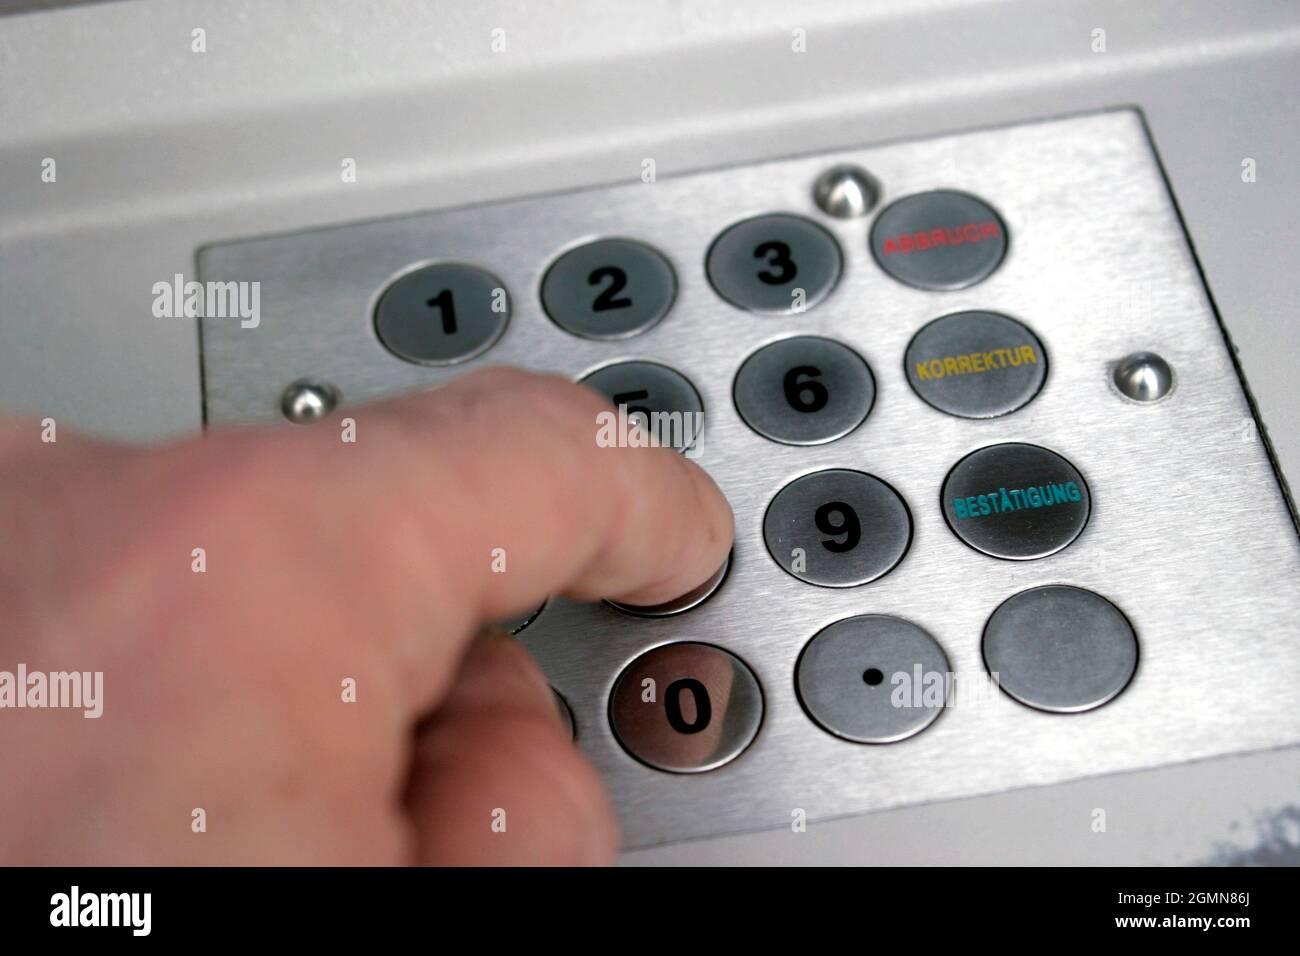 keyboard of an automatic cash dispenser Stock Photo